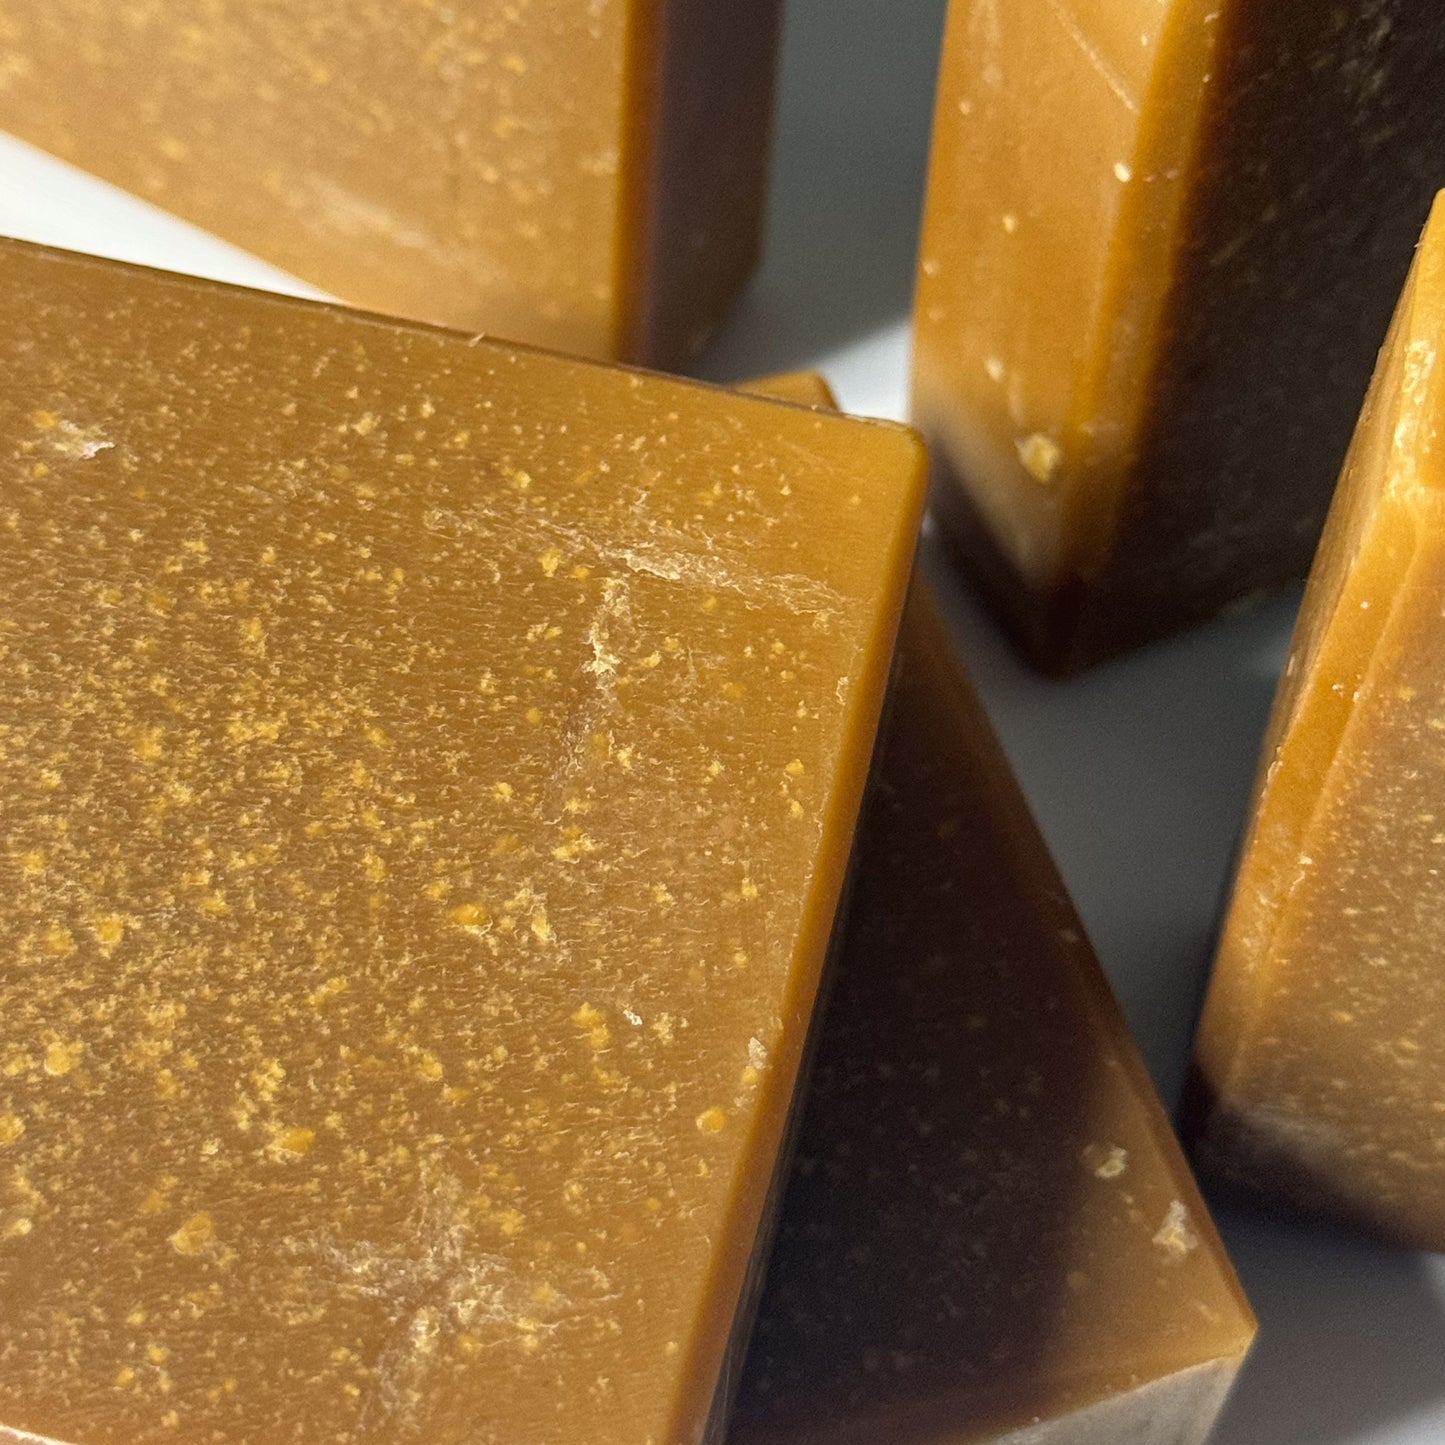 let it bee | unscented honey, oatmeal, & goat milk soap